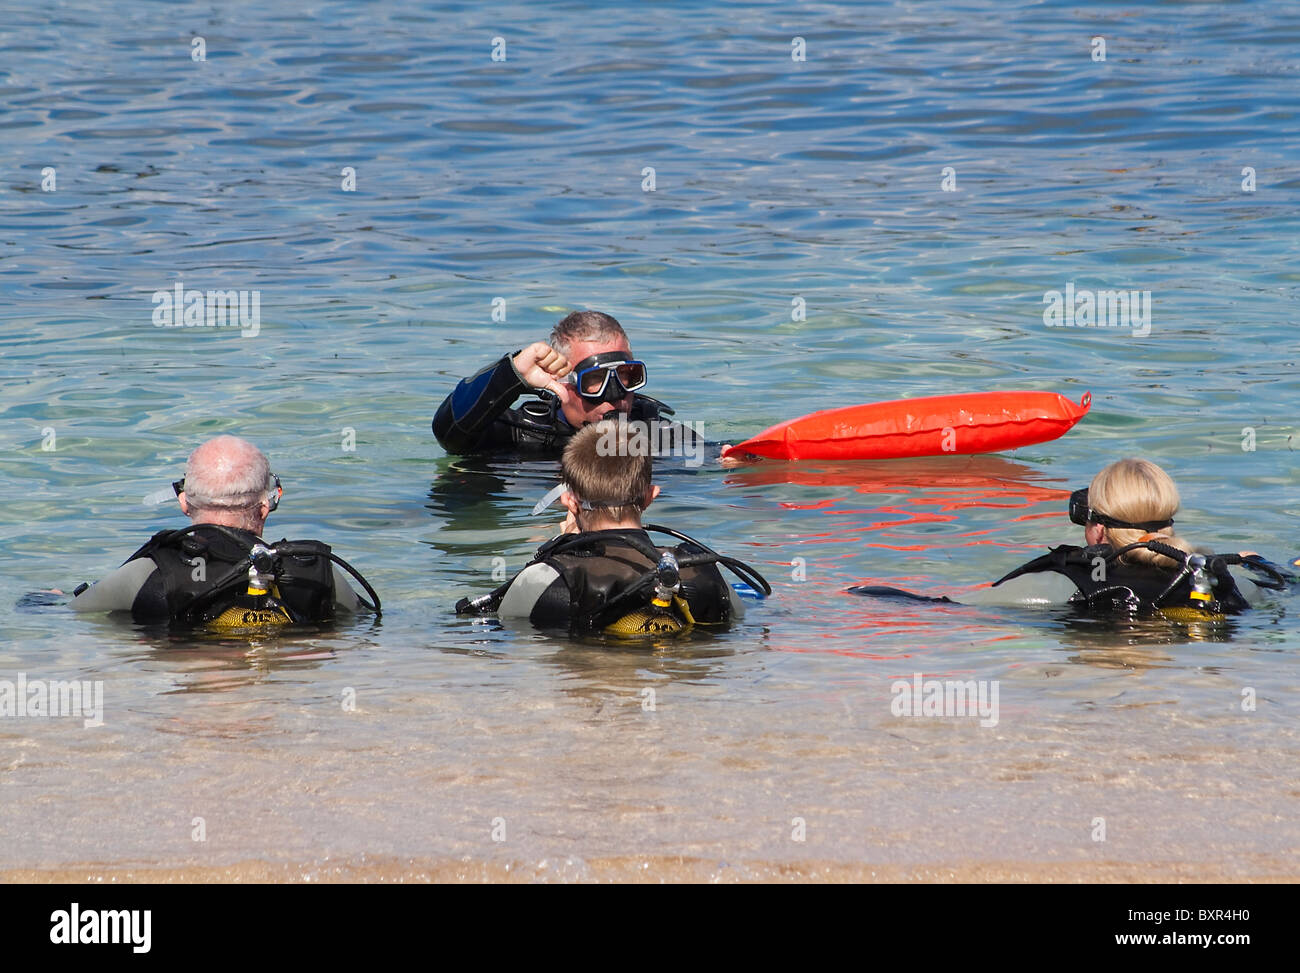 Divers learning to Dive at the Paradise Diving School, Cirkewwa, Malta  Stock Photo - Alamy